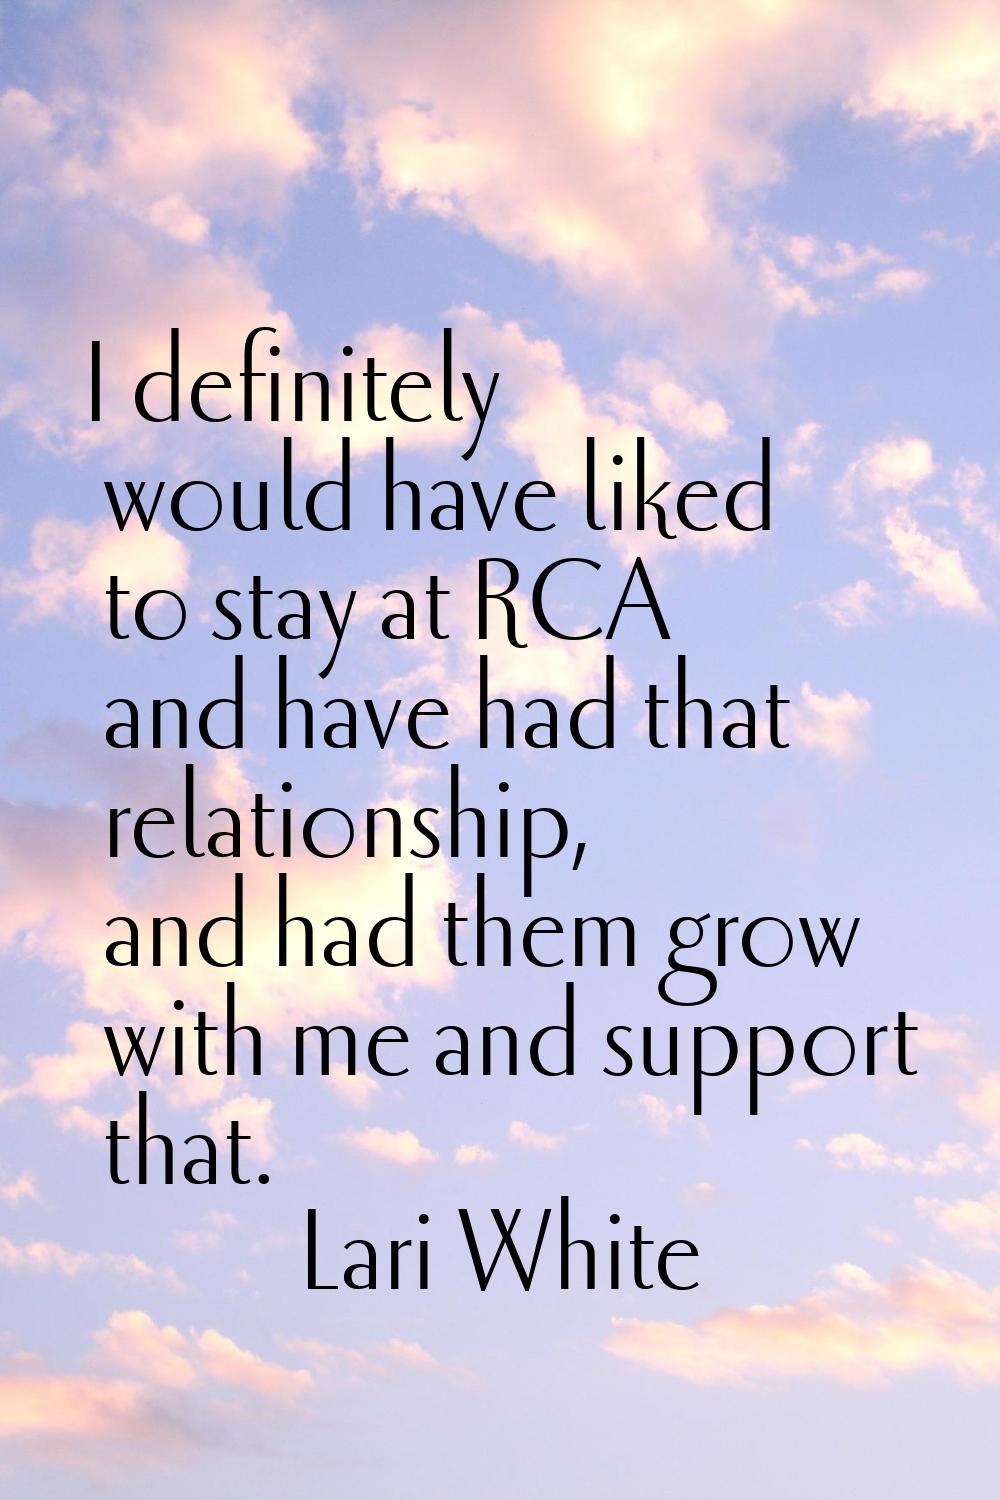 I definitely would have liked to stay at RCA and have had that relationship, and had them grow with